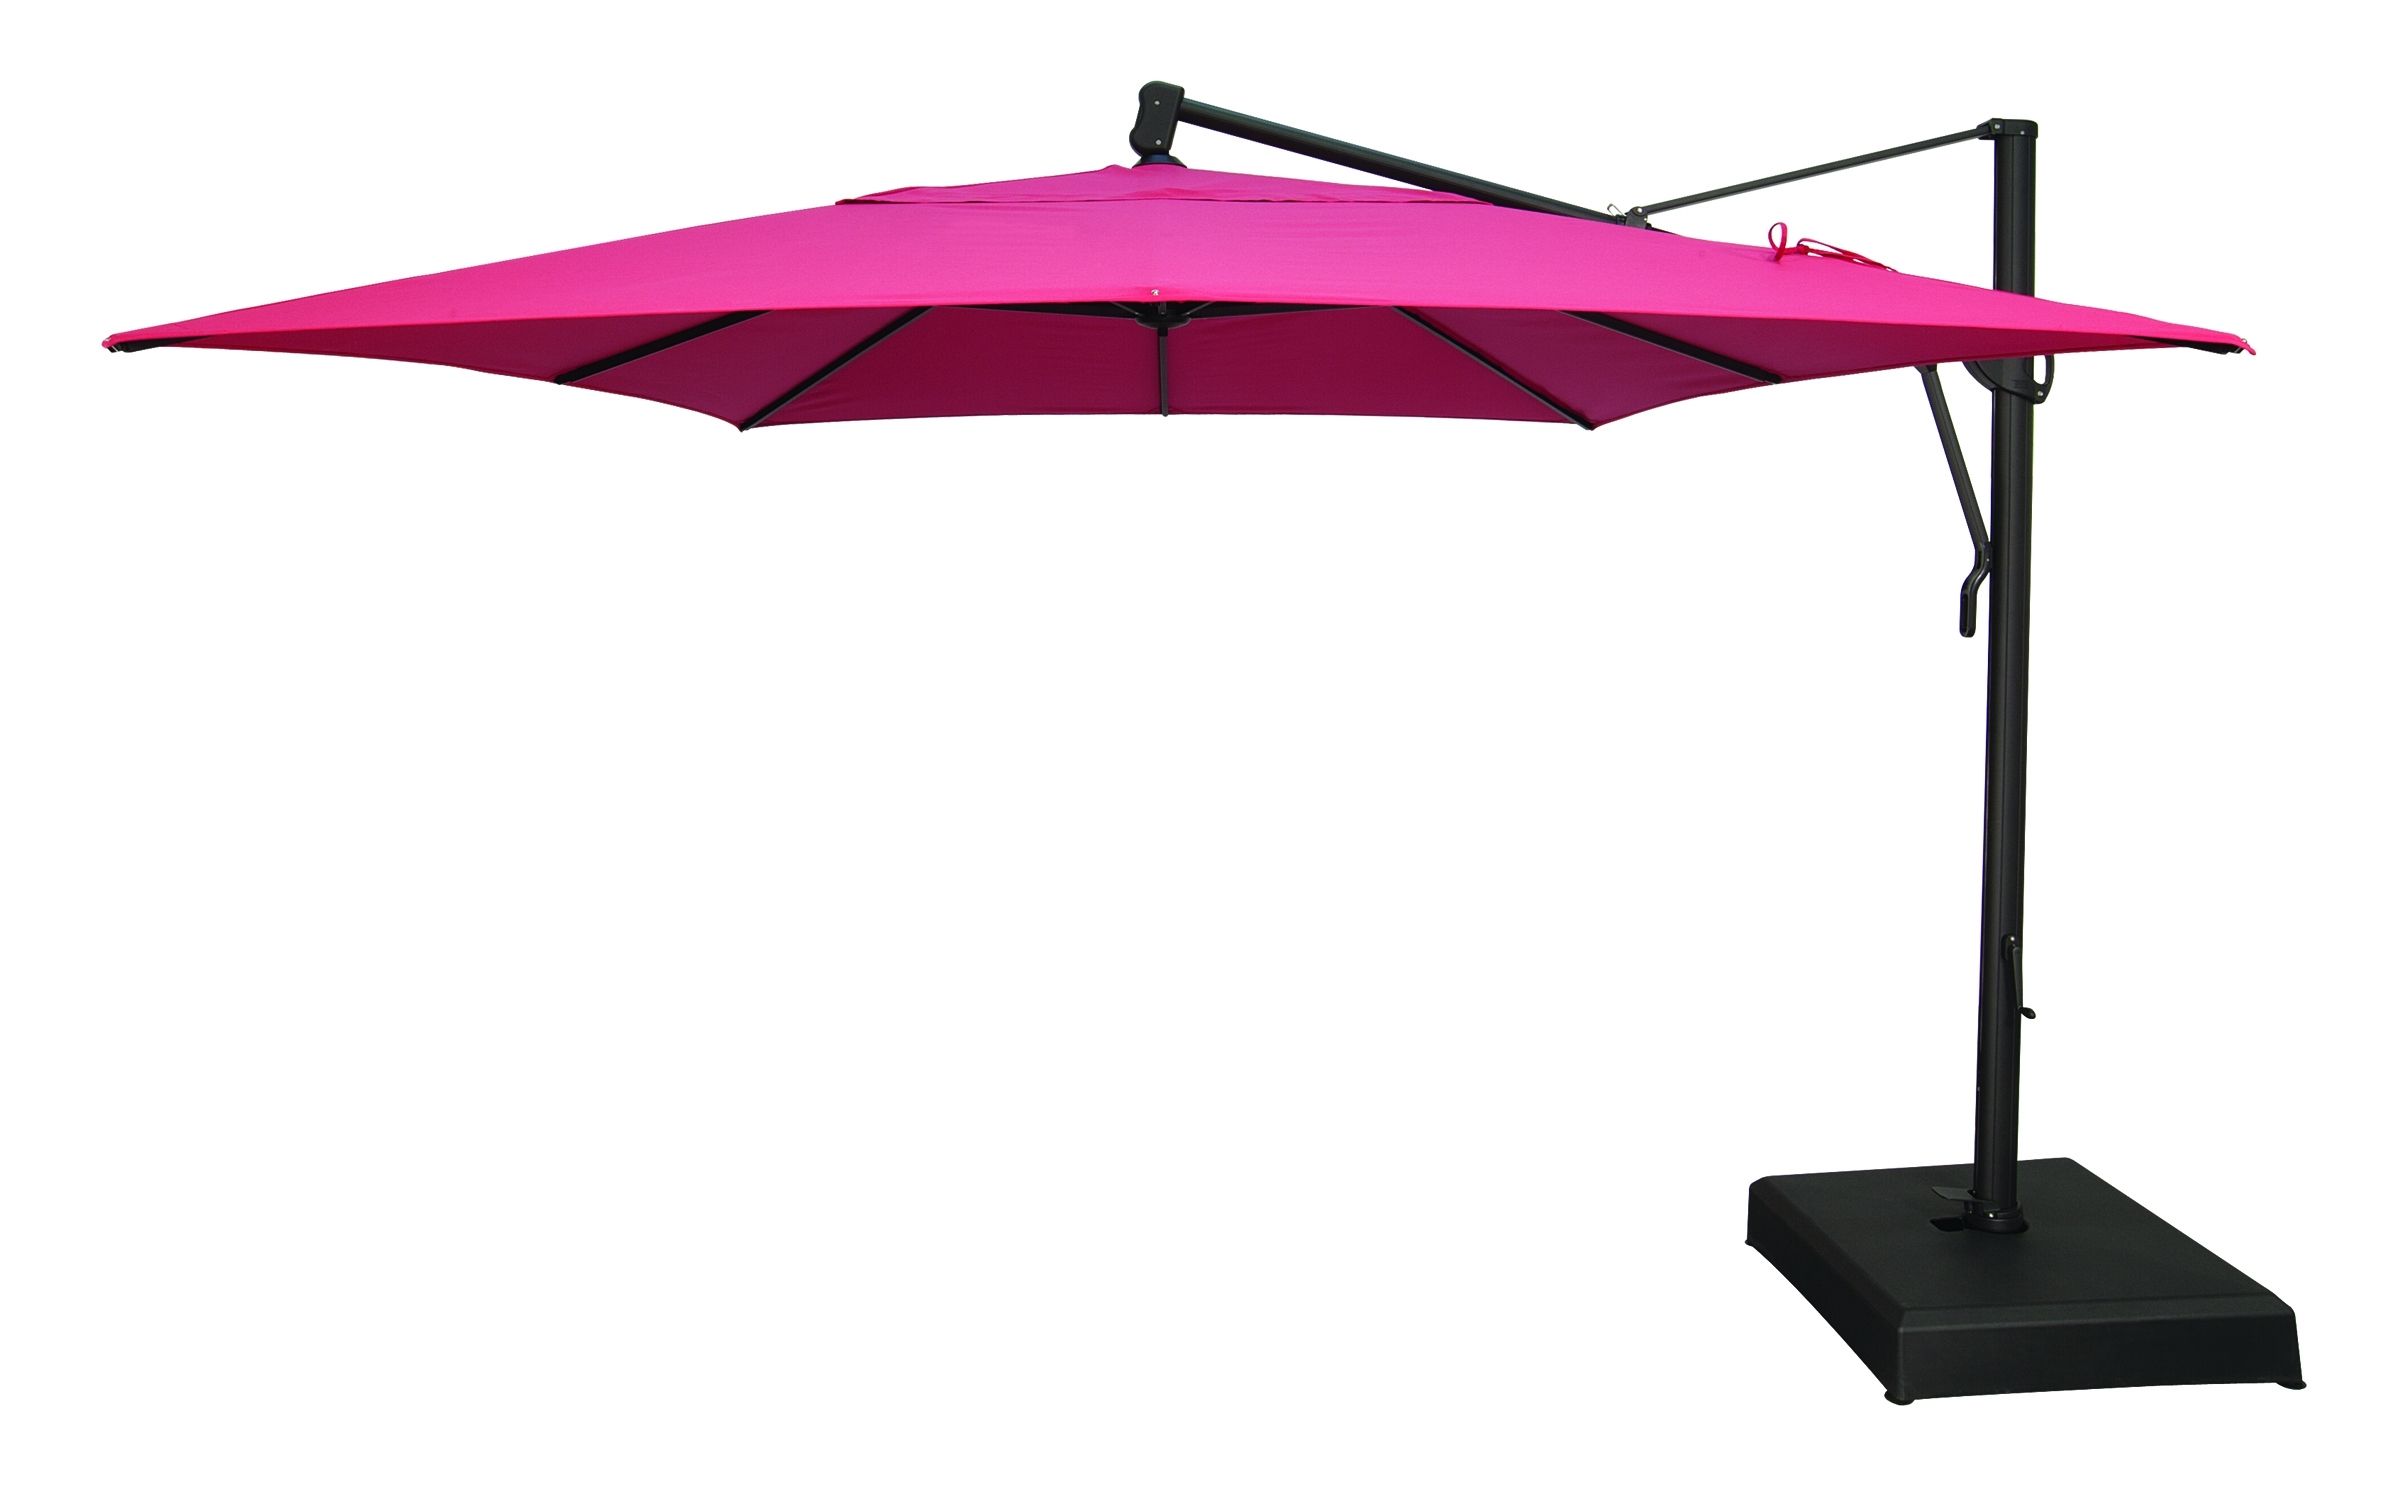 Most Recent Pink Fabric Outdoor Umbrella With Black Iron Base And Swing Arm Of In Pink Patio Umbrellas (View 8 of 20)